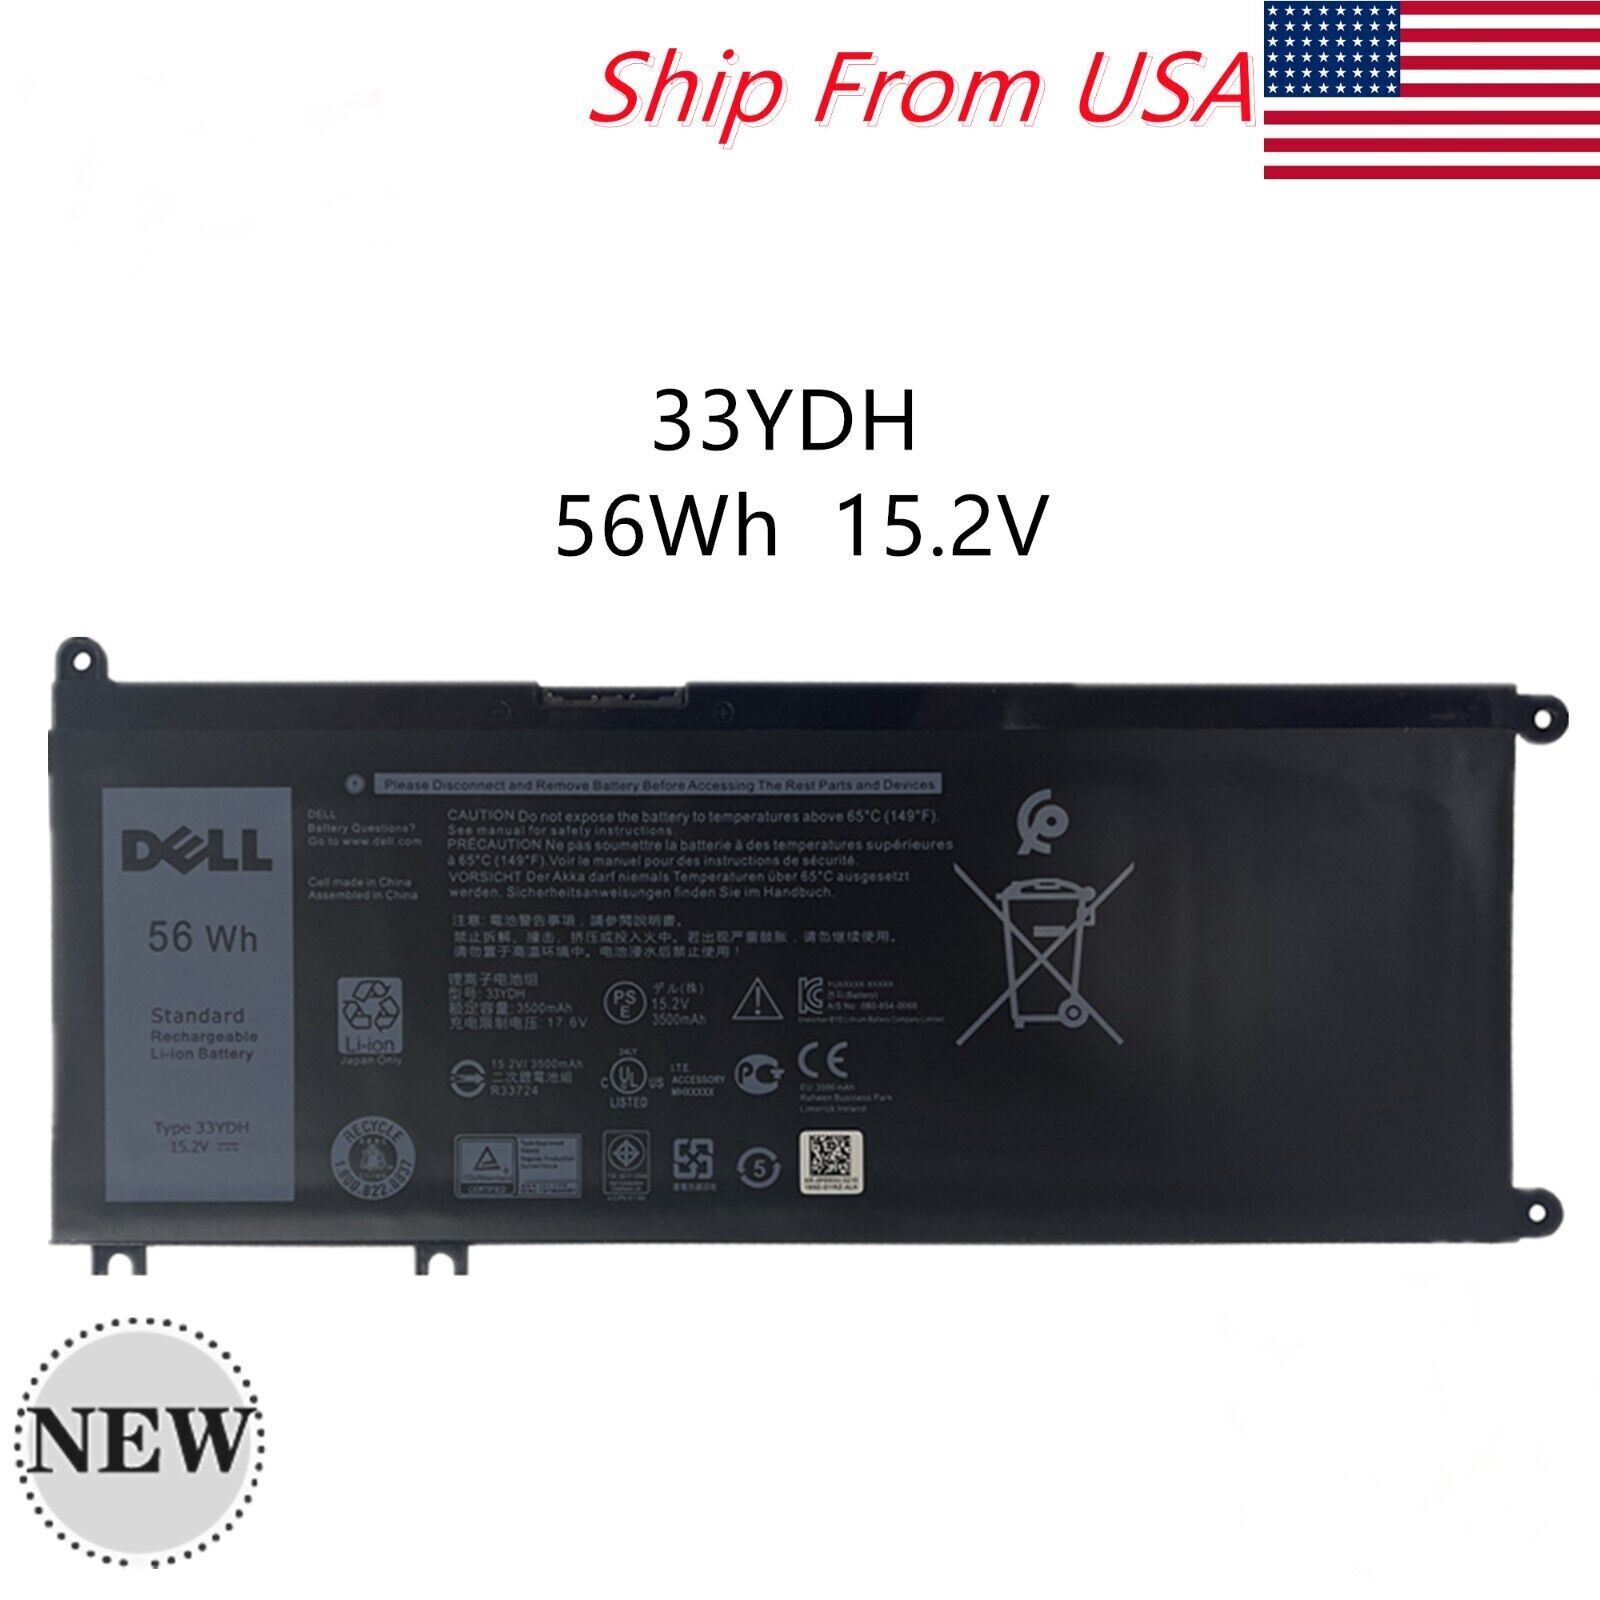 NEW Genuine 56Wh 33YDH Battery For Dell Inspiron 17 7773 7778 7779 7786 2-in-1